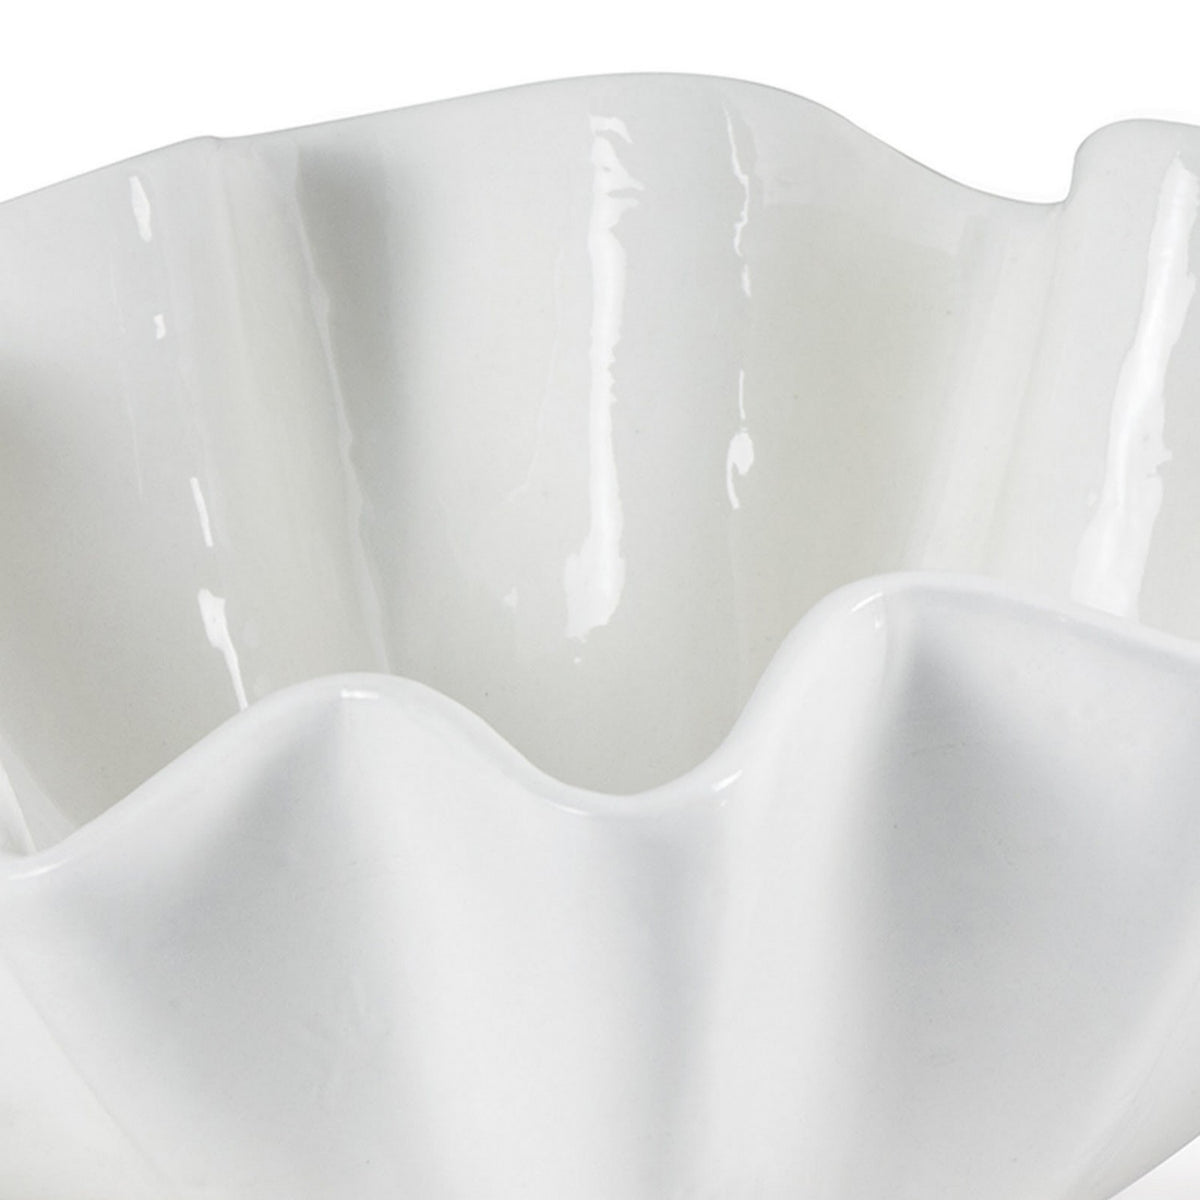 Regina Andrew Bowl from the Ruffle collection in Ivory finish